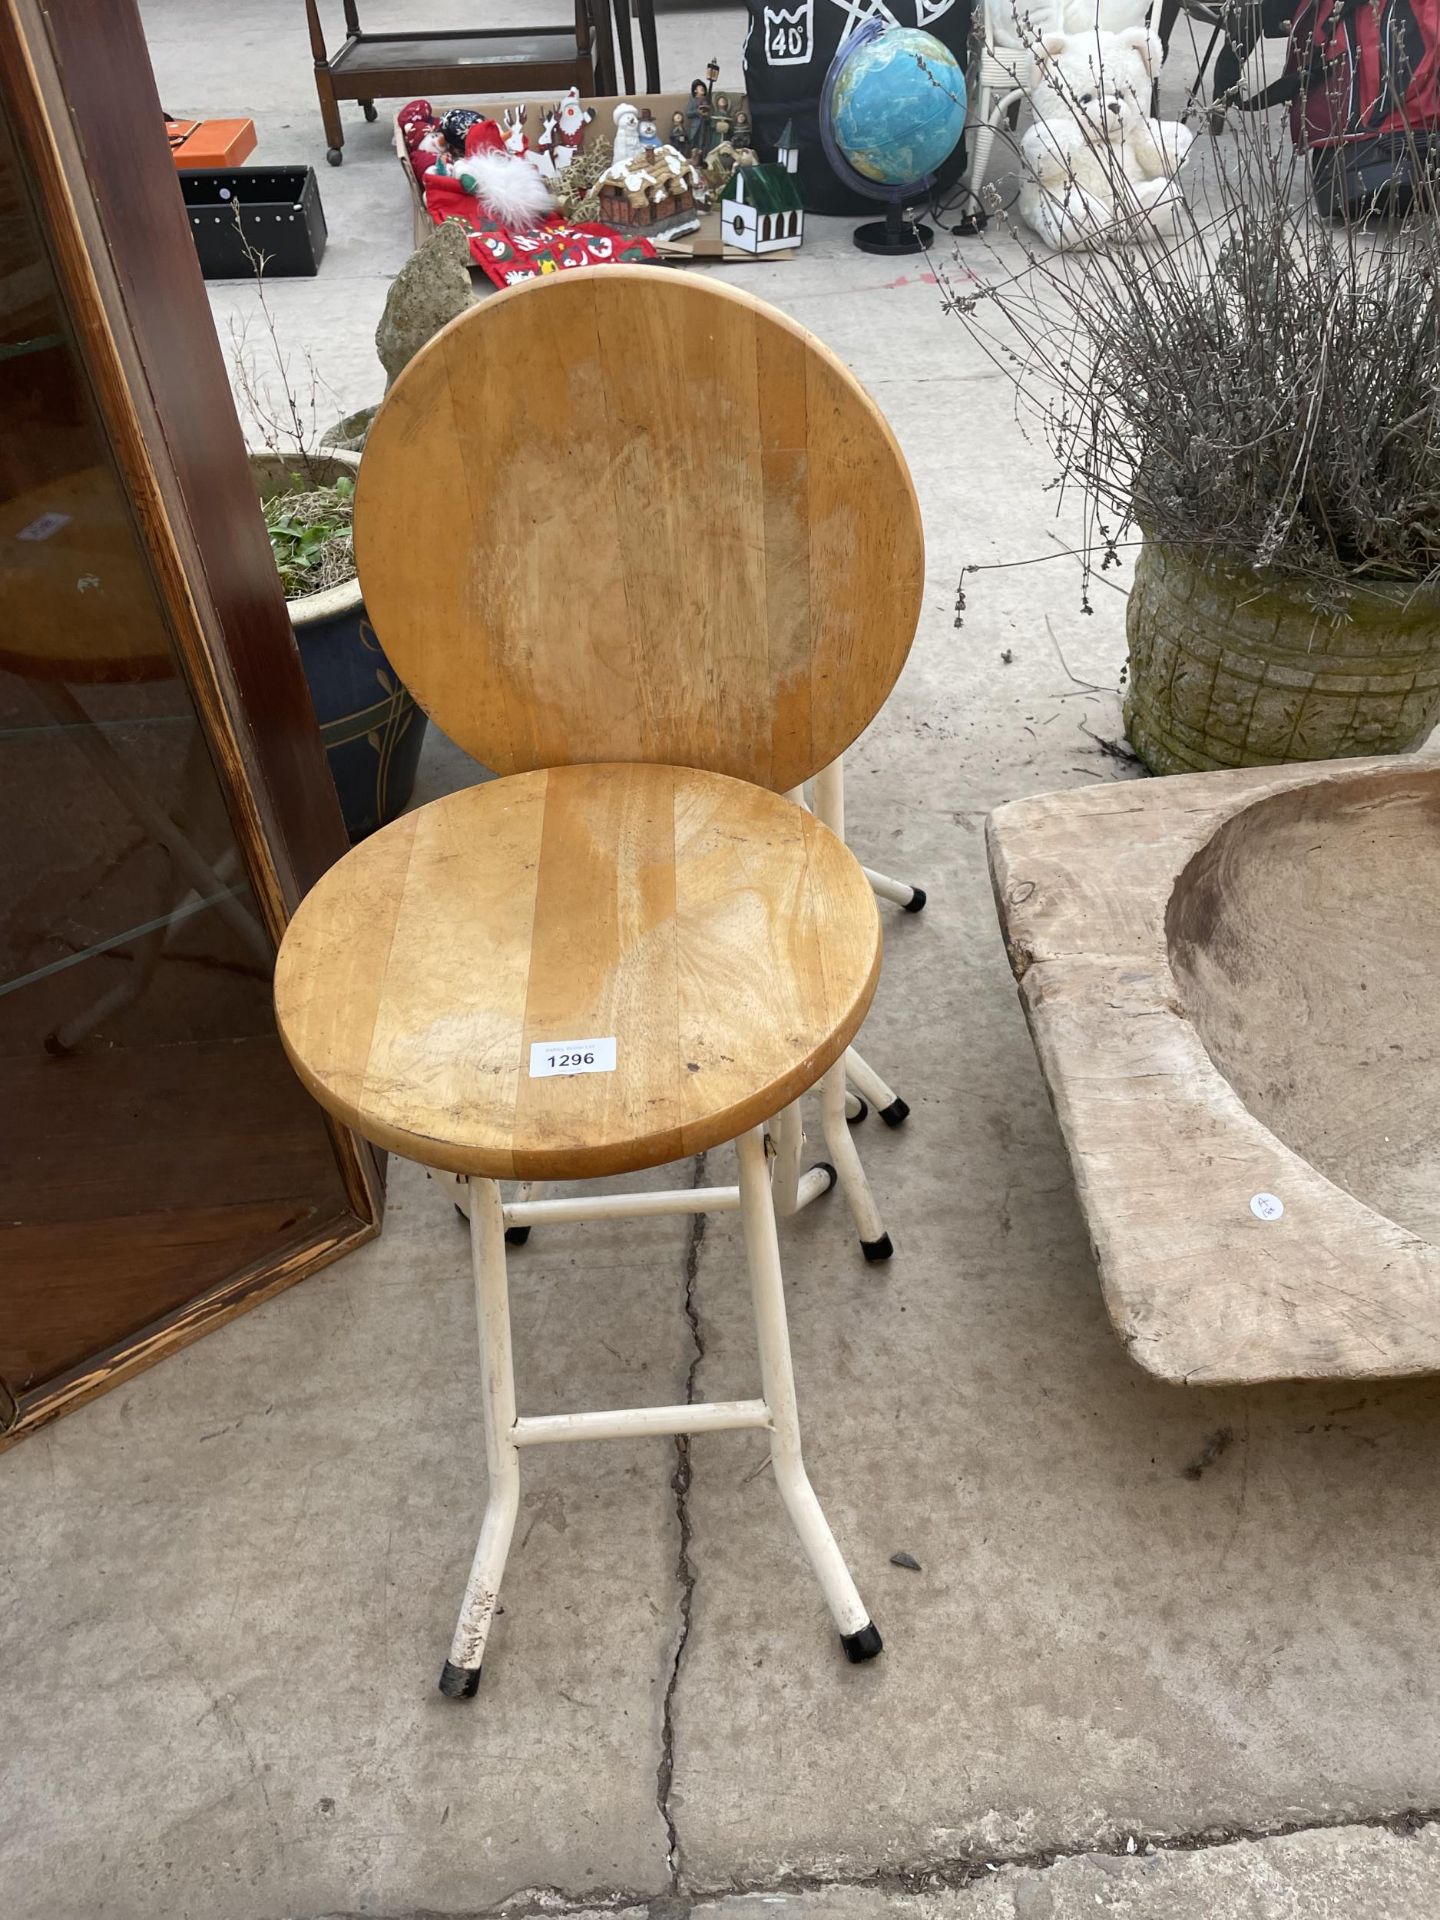 THREE FOLDING WOODEN TOPPED STOOLS WITH METAL LEGS - Image 2 of 2